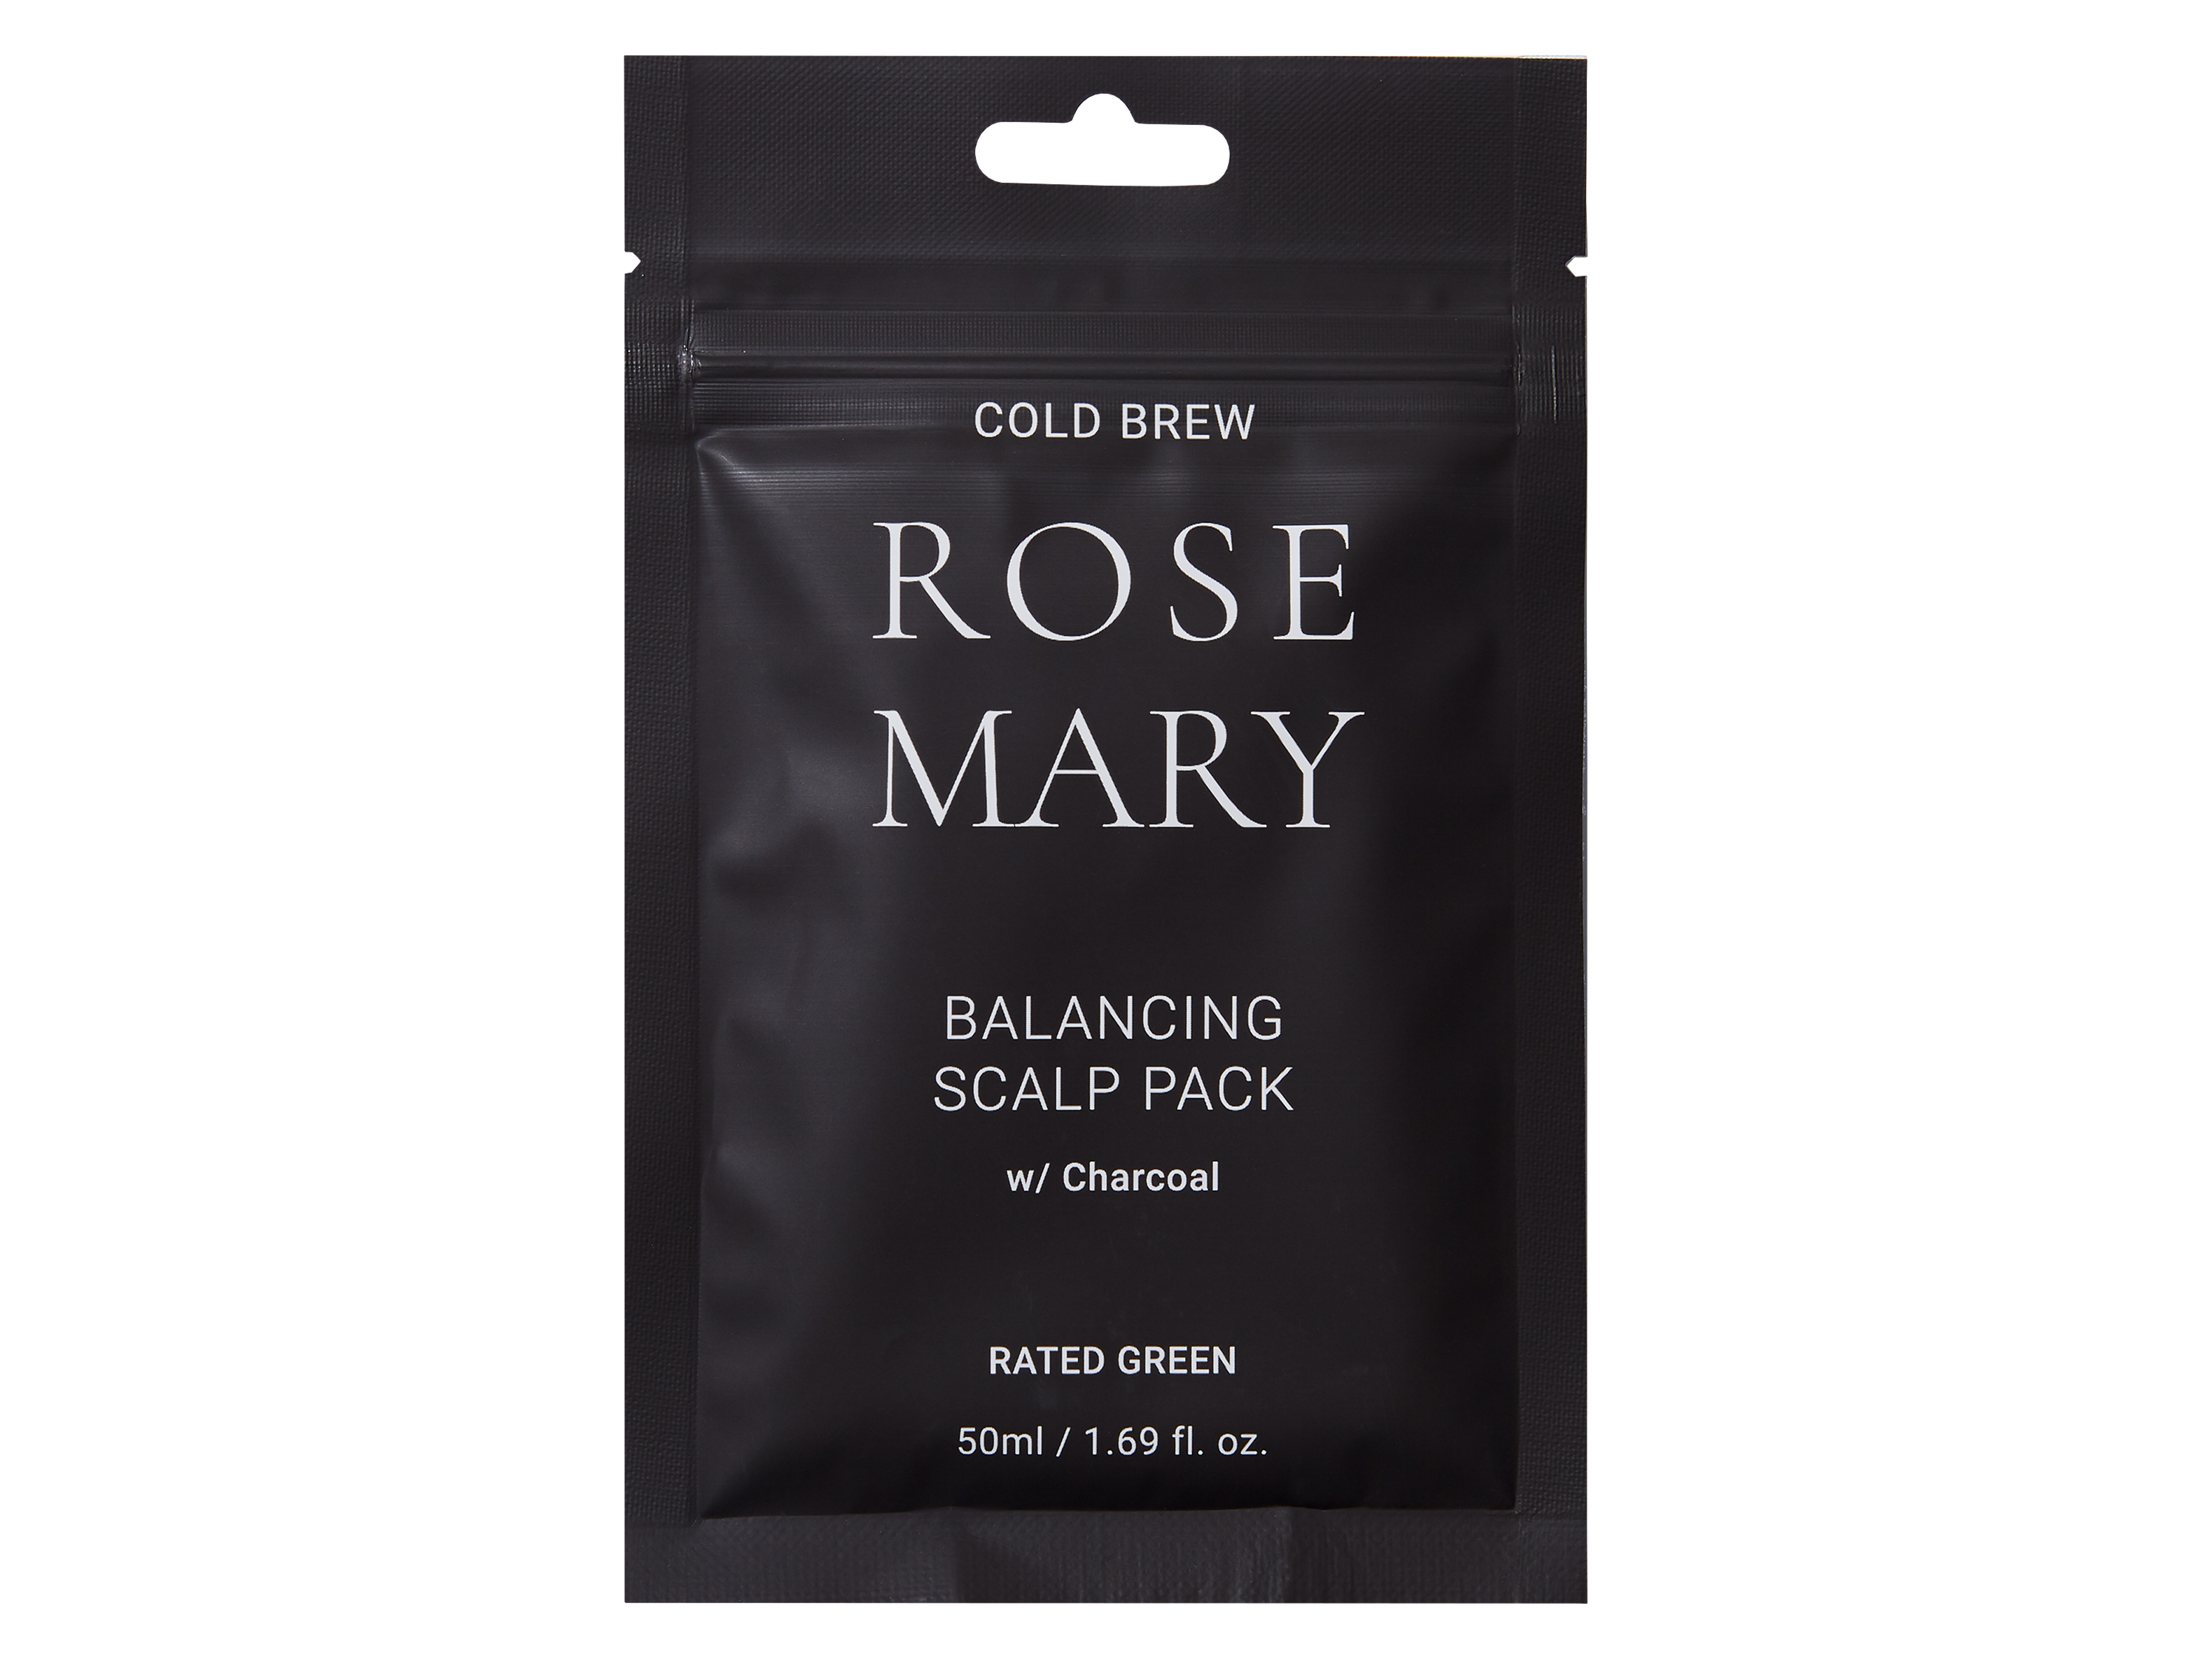 Rated Green Cold Brew Rosemary Balancing Scalp Pack, 50 ml